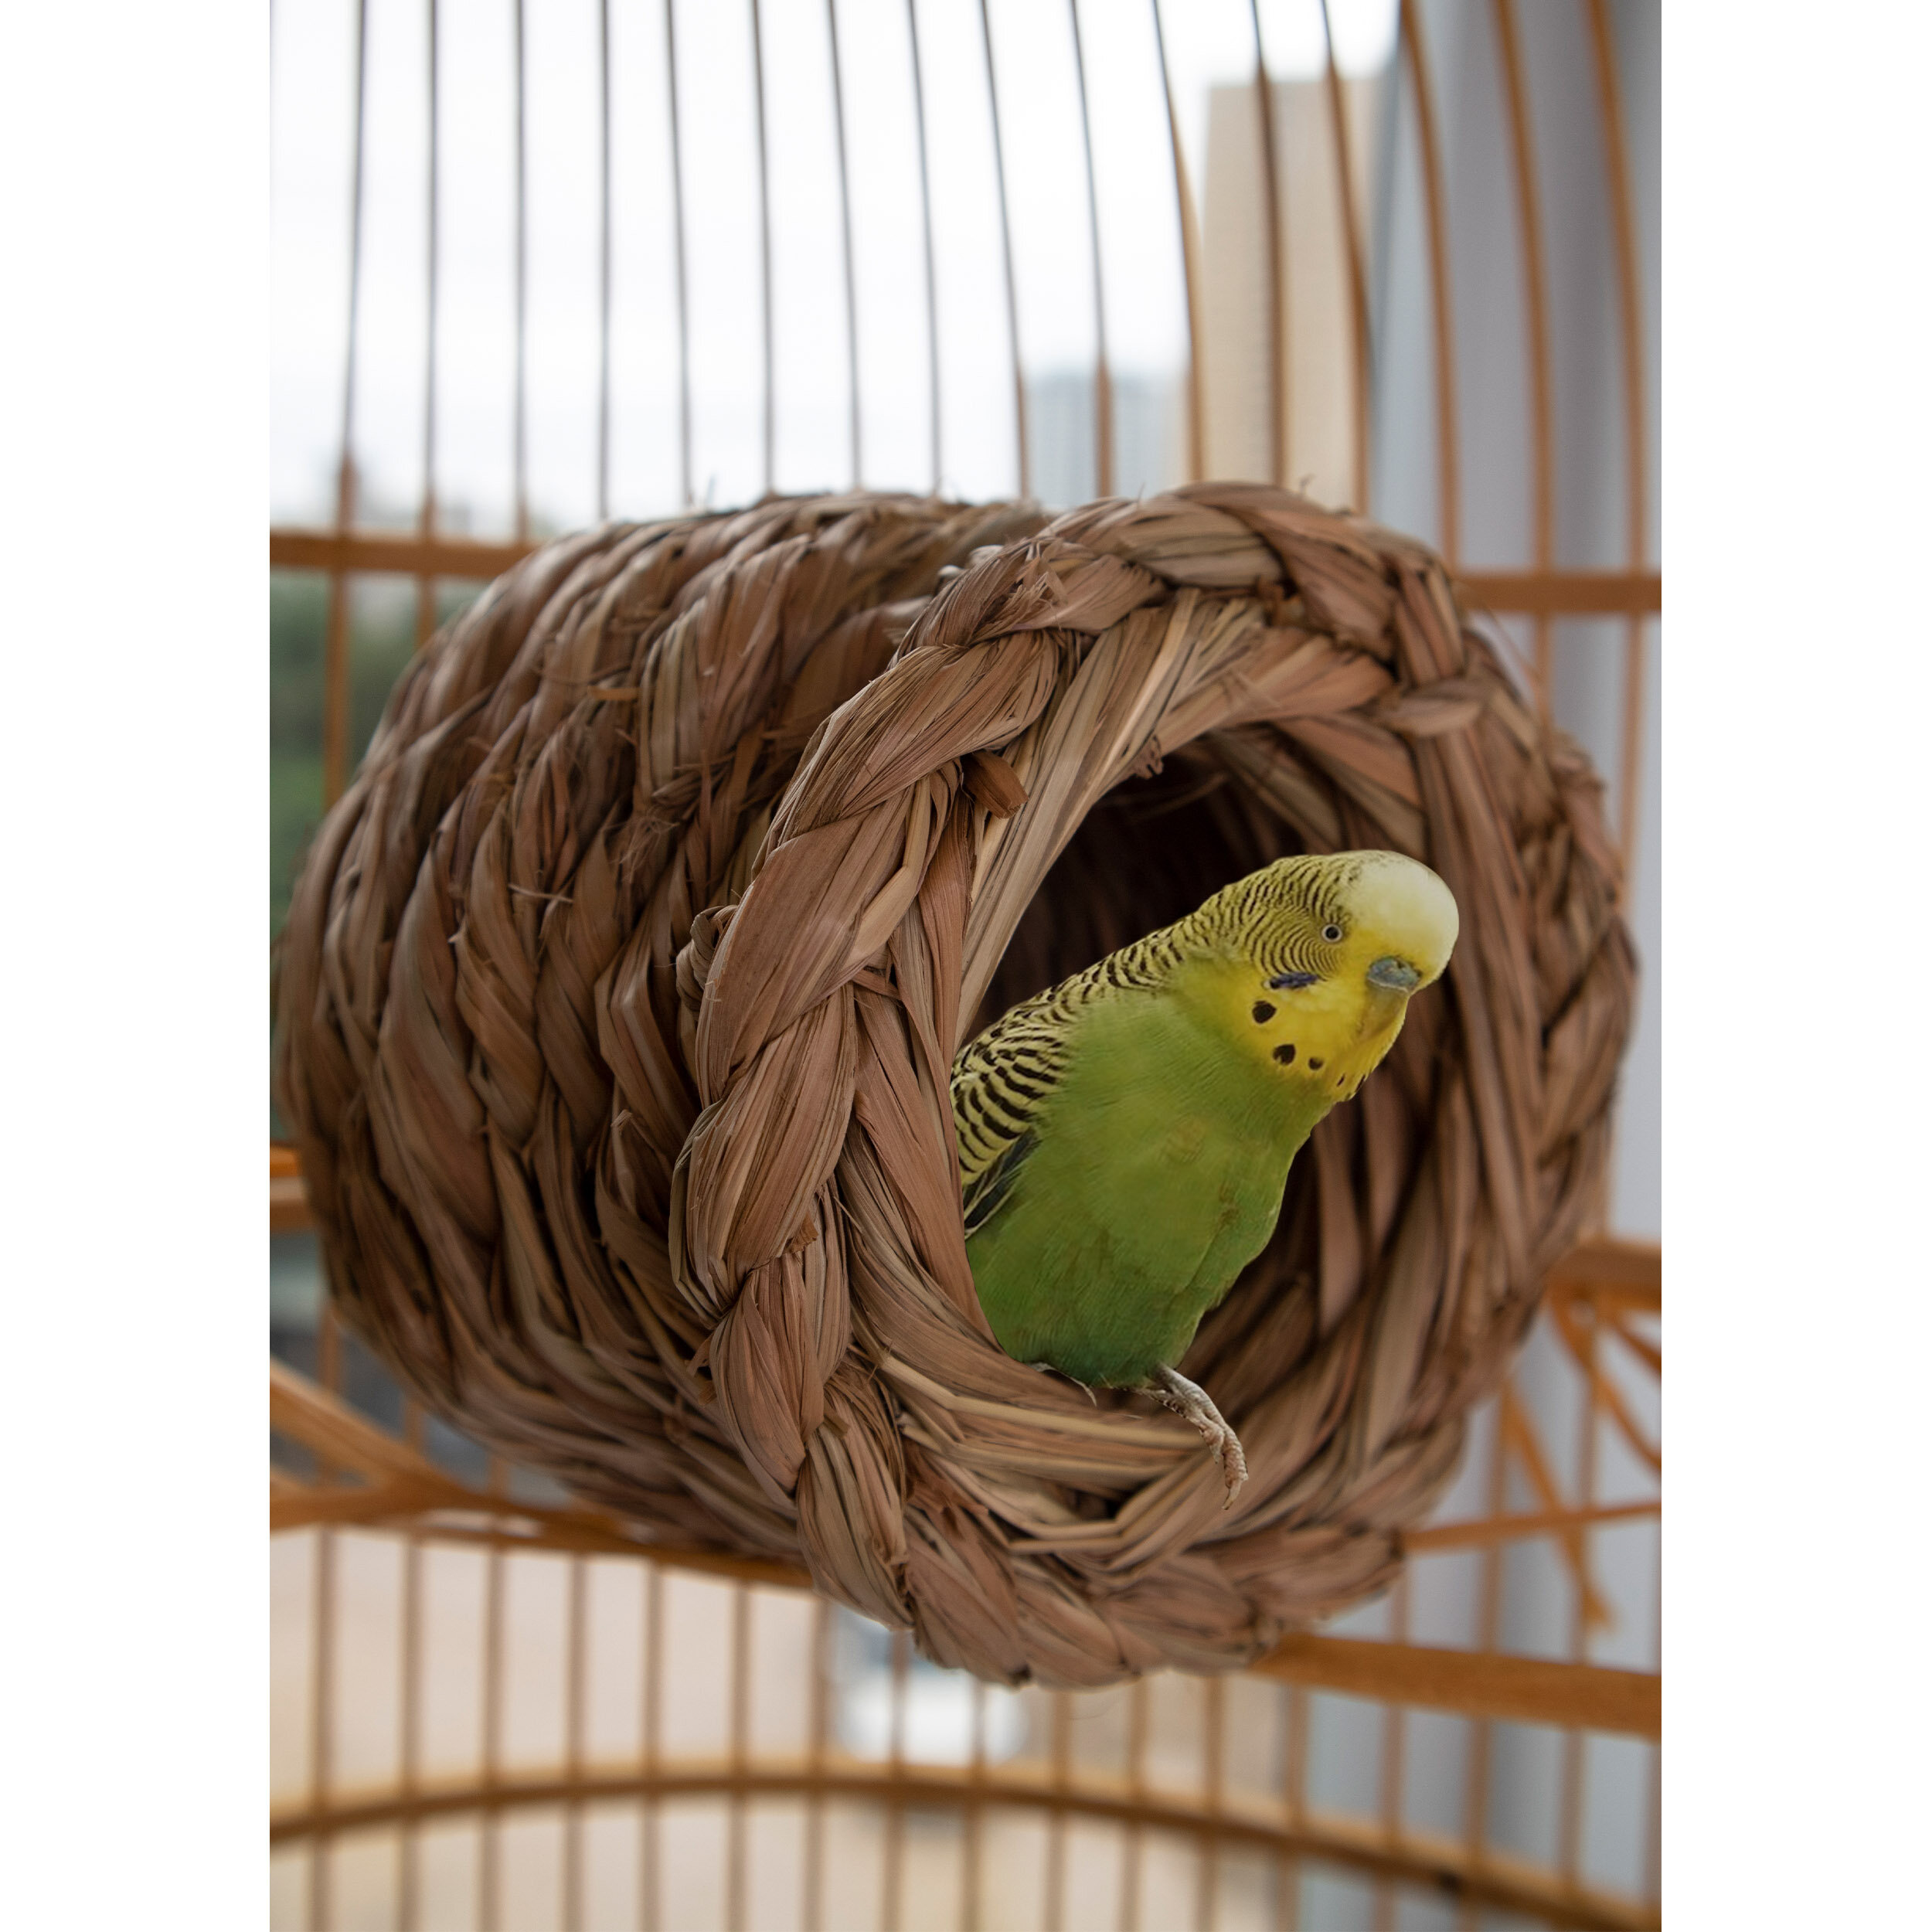 Details about   Straw Bird Birdhouse For Parrot Hamster Small Pets Animals Cage Home Ha 